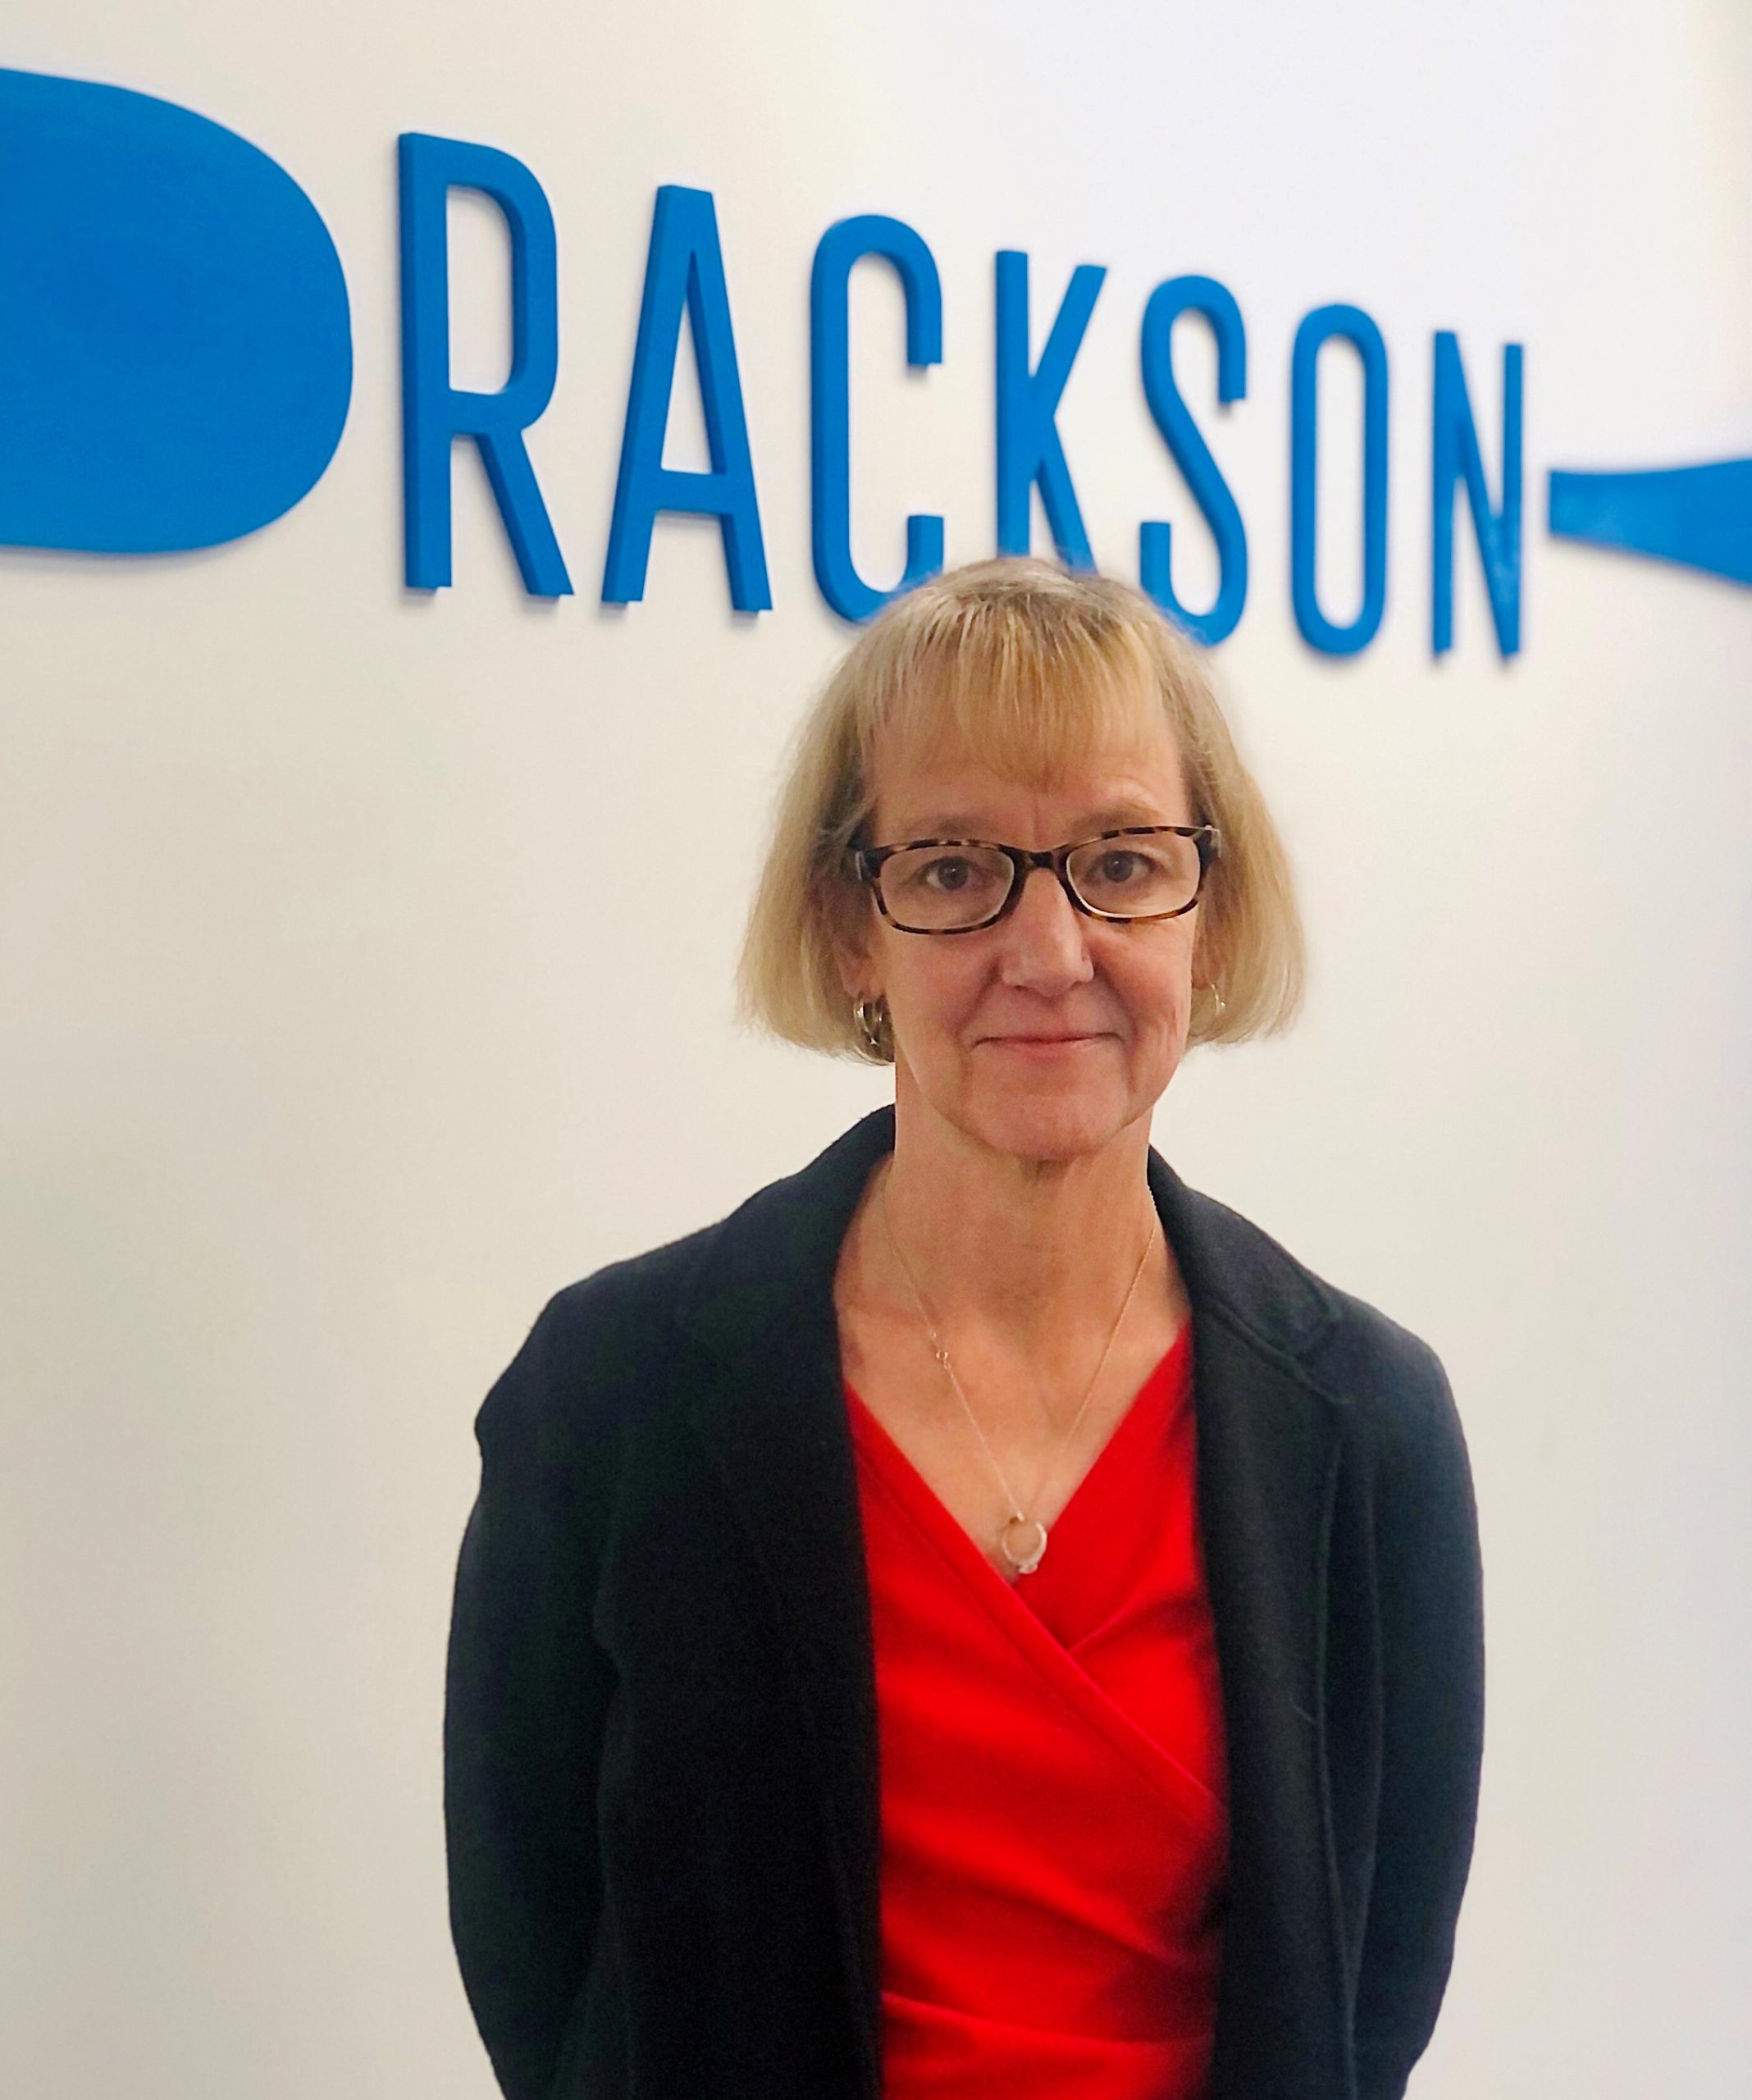 You are currently viewing Rackson hires new CFO, Susan Daggett